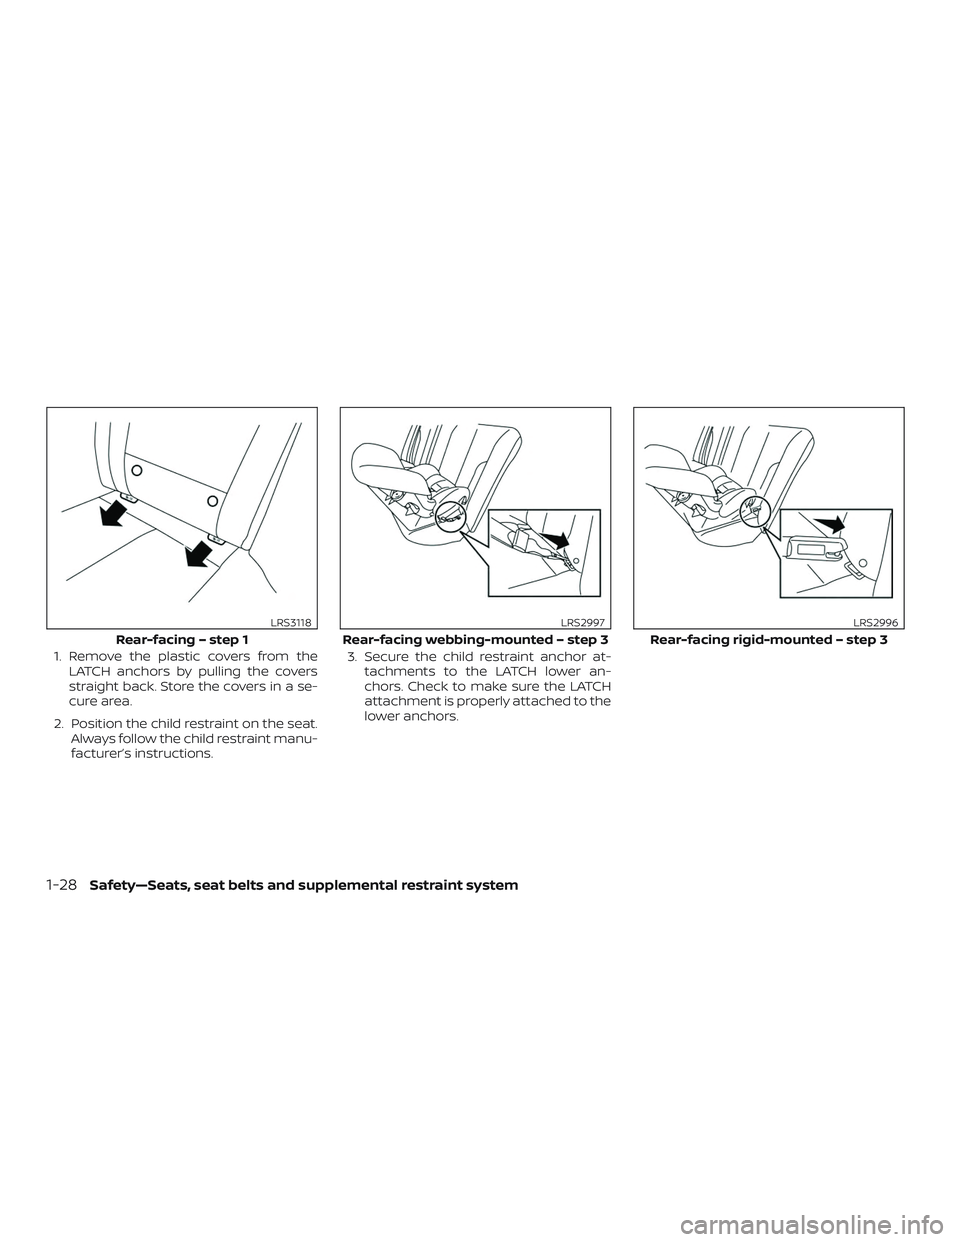 NISSAN MAXIMA 2019  Owner´s Manual 1. Remove the plastic covers from theLATCH anchors by pulling the covers
straight back. Store the covers in a se-
cure area.
2. Position the child restraint on the seat. Always follow the child restra